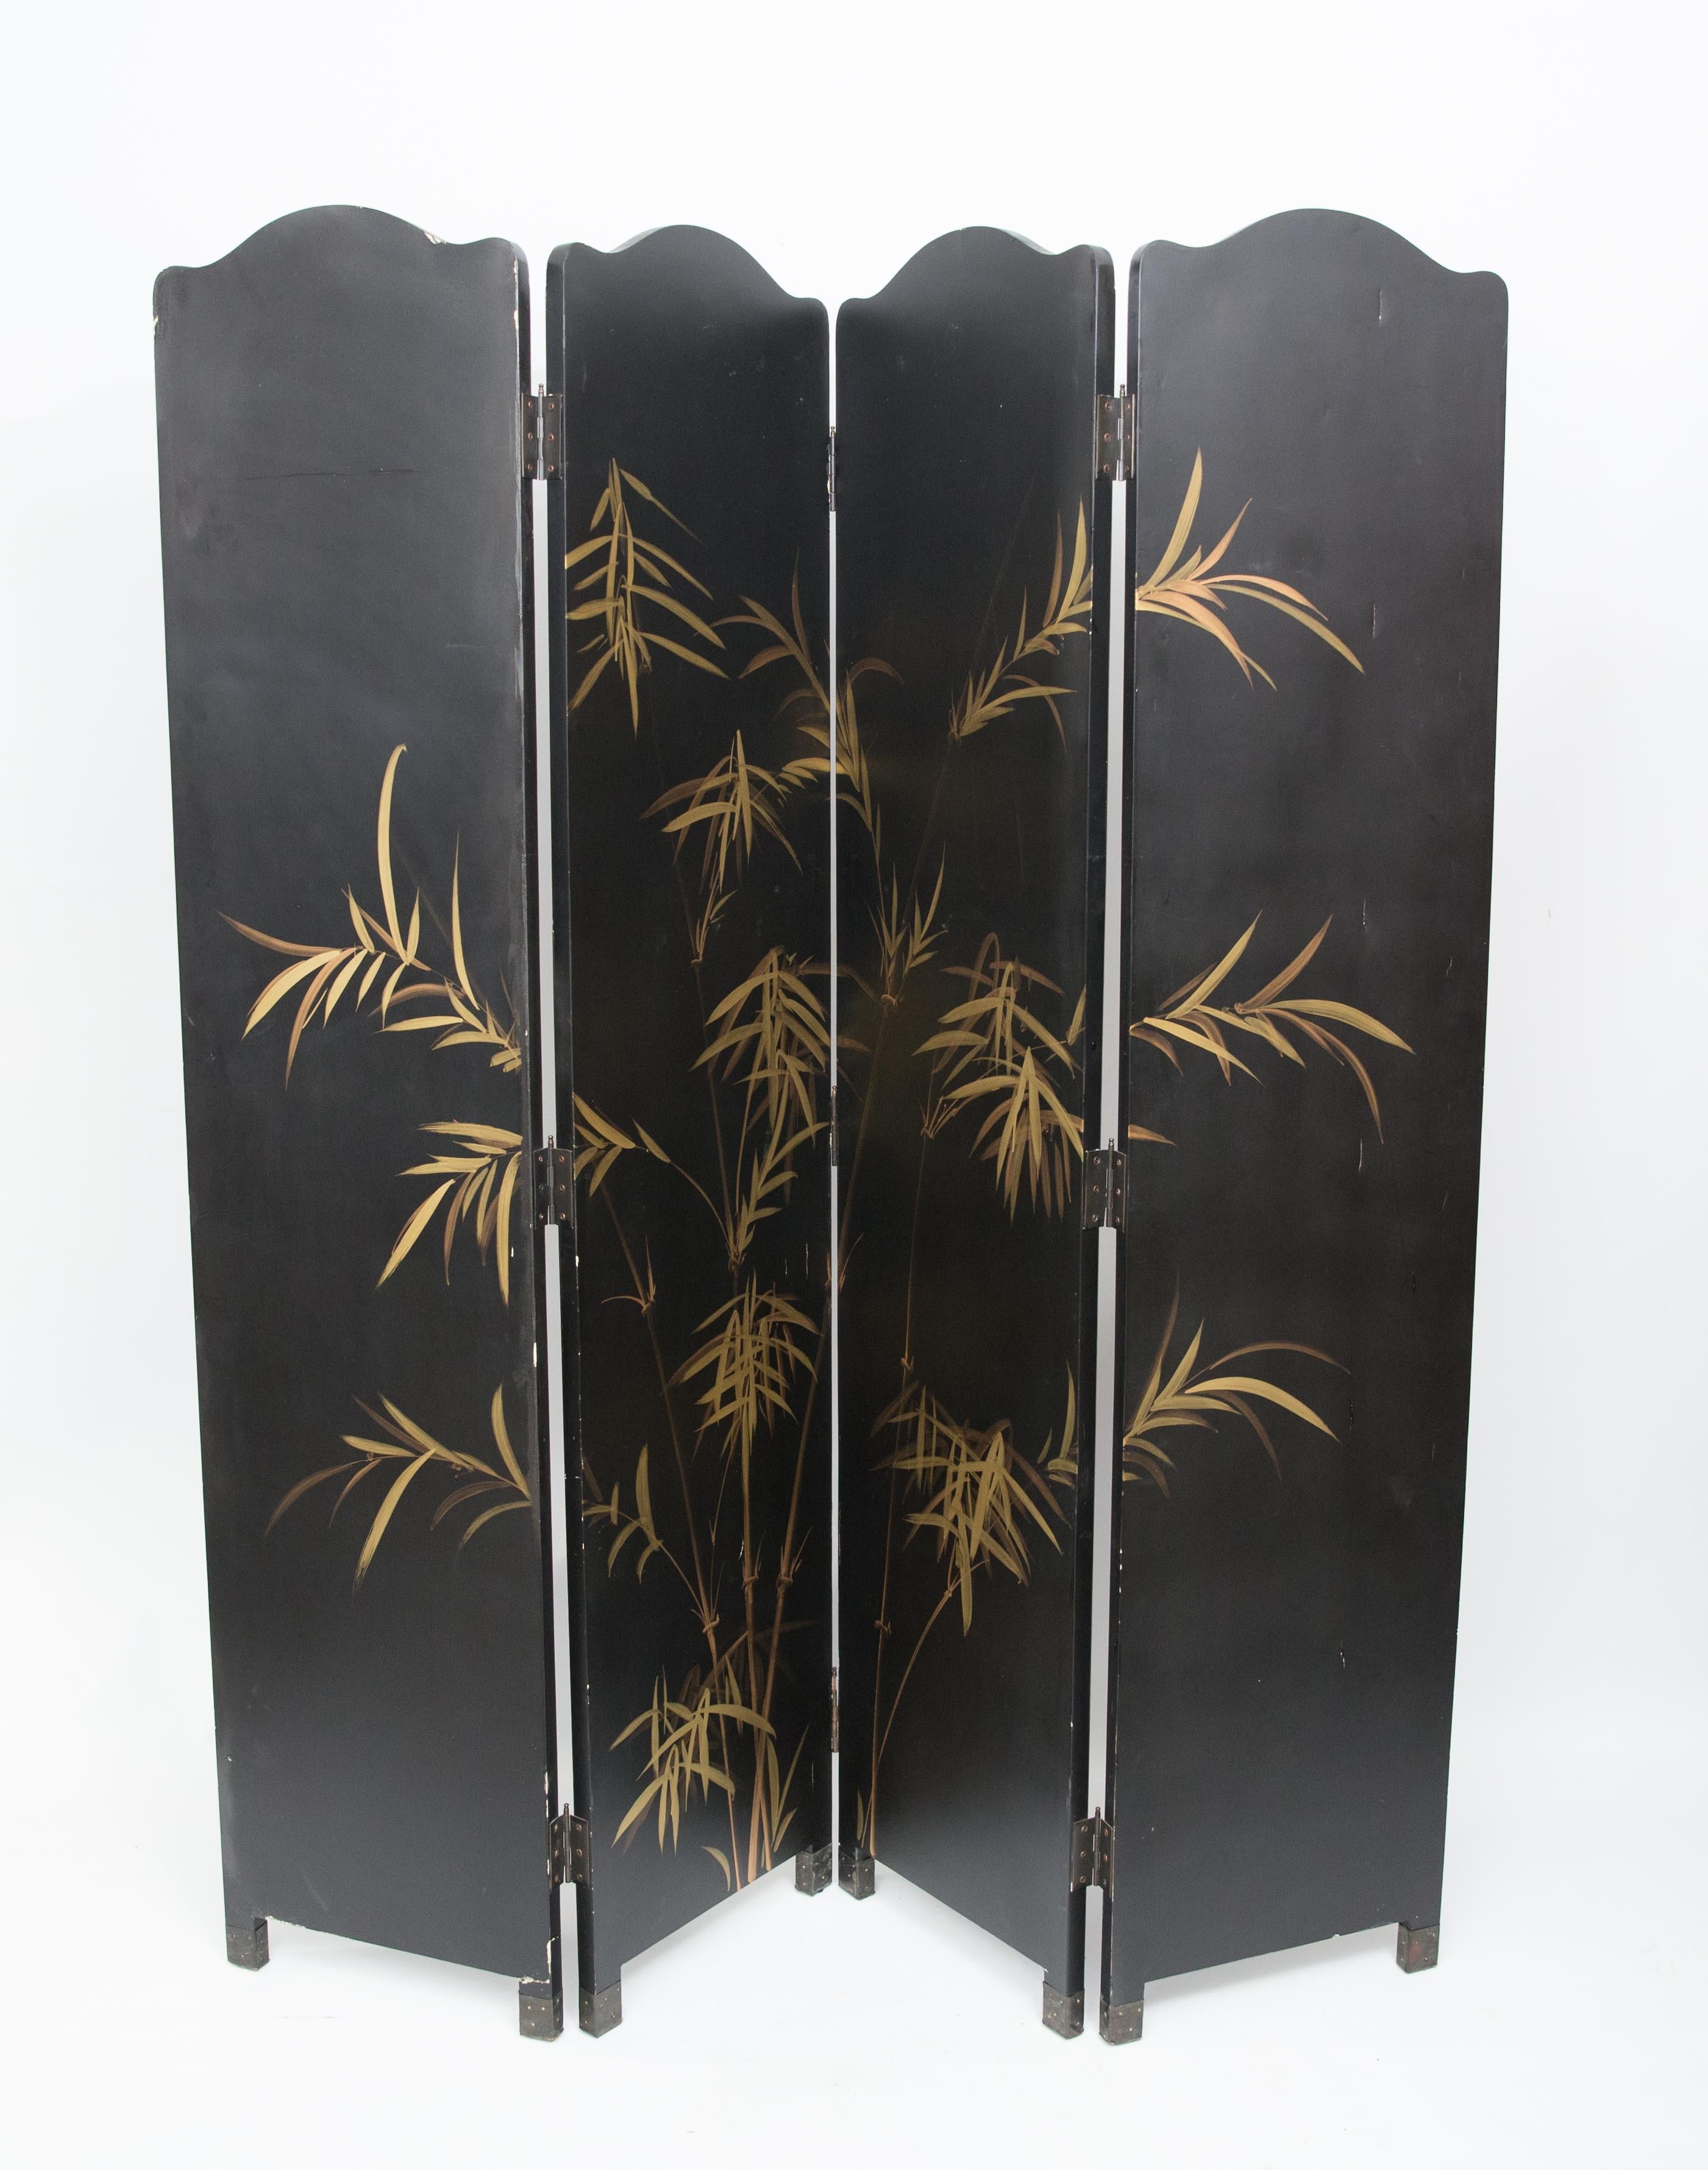 Wood Japanese Meiji 4-Fold Screen Hand Painted Depicting Birds and Foliage